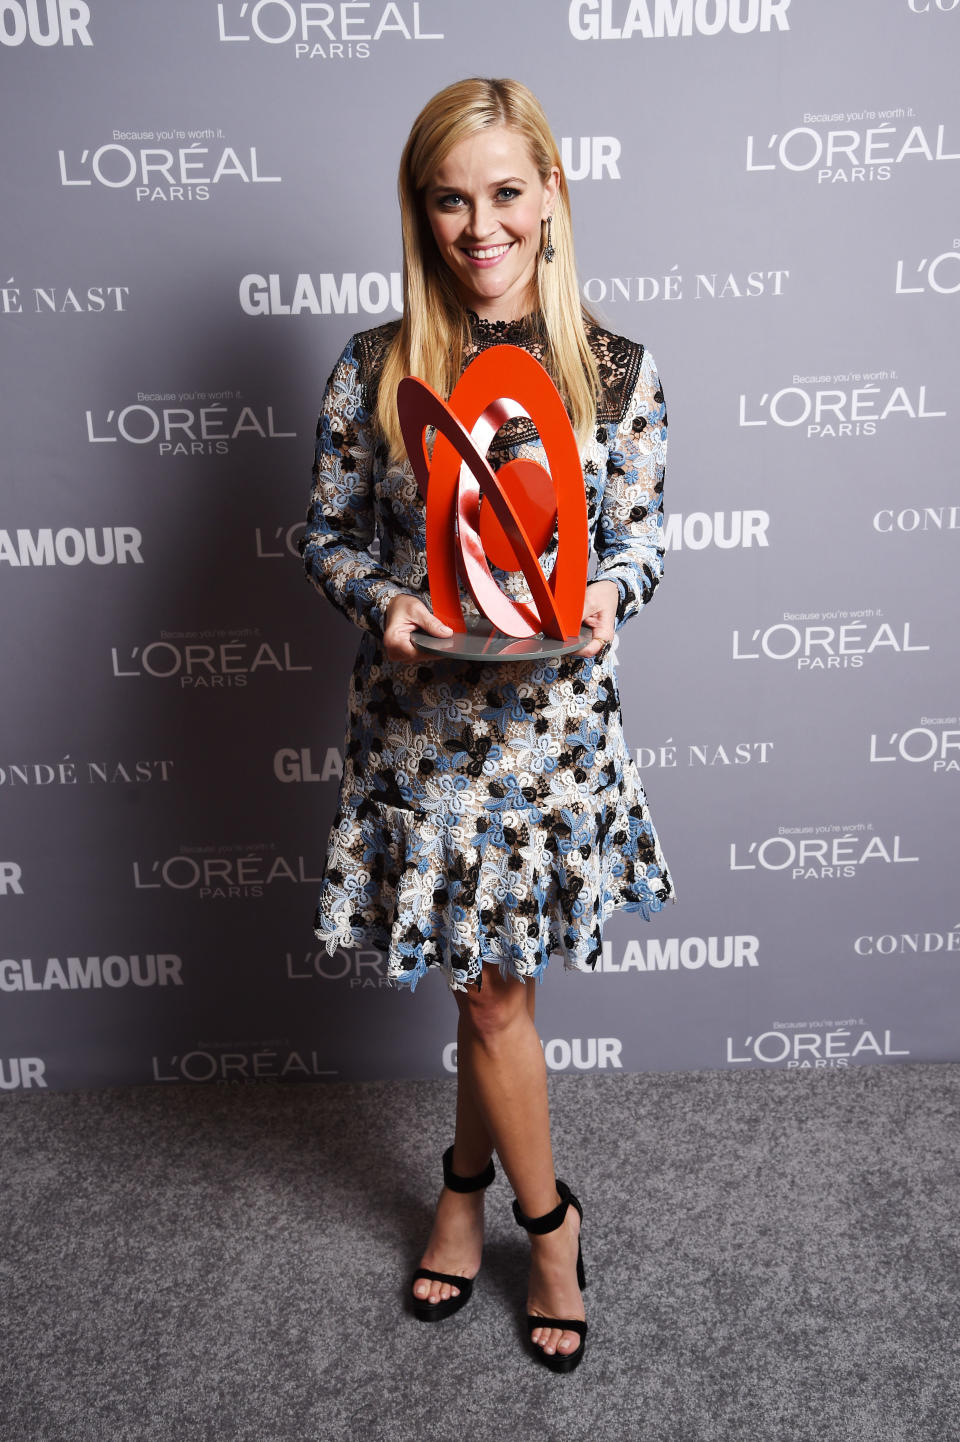 NEW YORK, NY - NOVEMBER 09:  Reese Witherspoon poses with her award at the 2015 Glamour Women Of The Year Awards at Carnegie Hall on November 9, 2015 in New York City.  (Photo by Dimitrios Kambouris/Getty Images for Glamour)